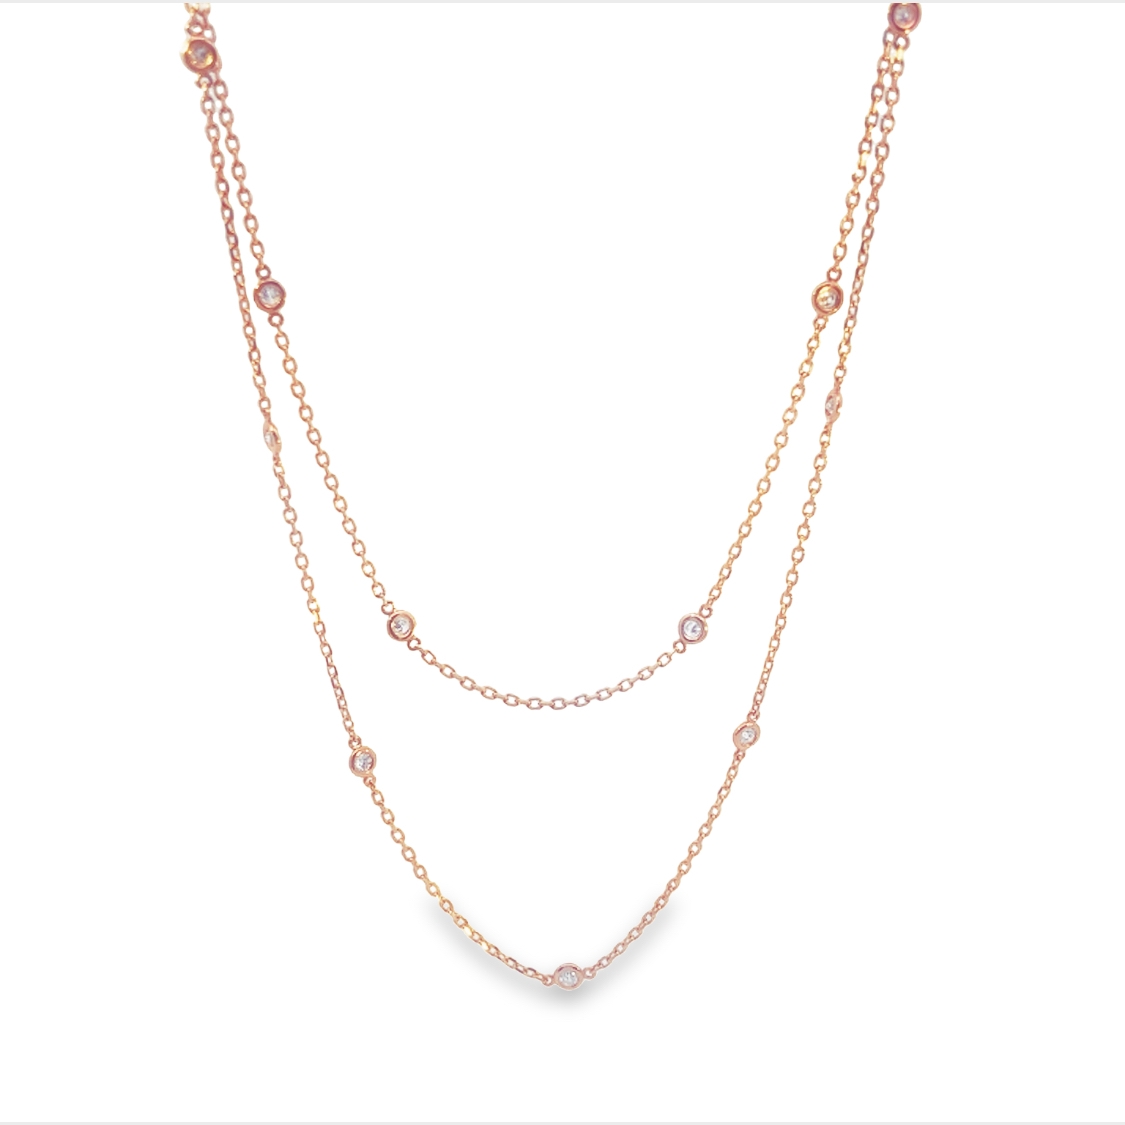 14K Rose Gold Necklace with 16 Round Brilliant Cut Diamonds 0.50 Tcw G-H SI1 Size 24